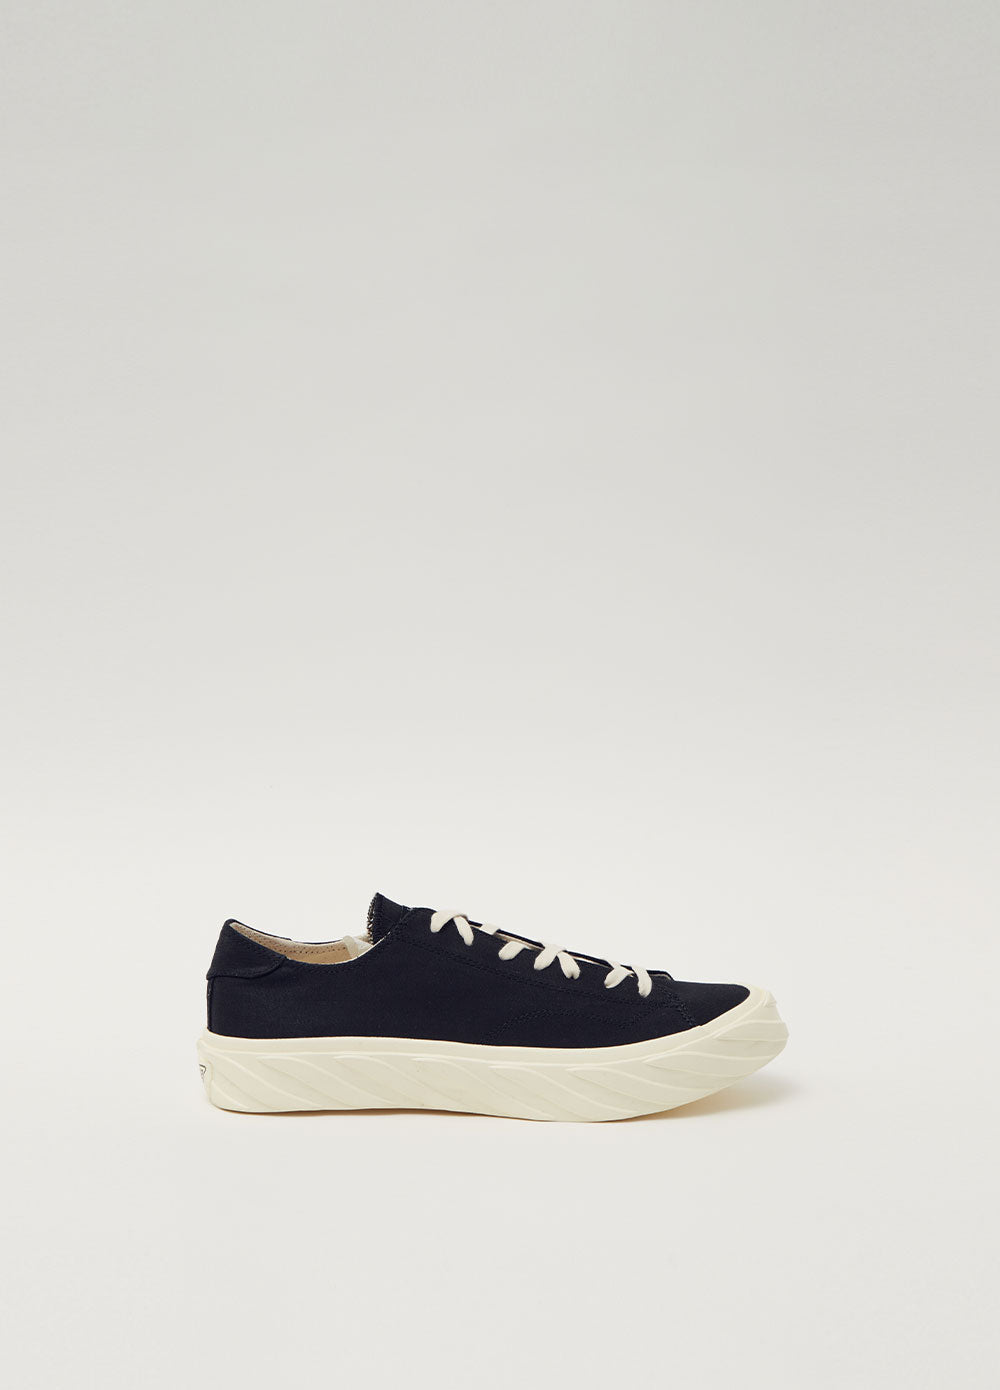 Cut Core Coated Canvas Sneakers